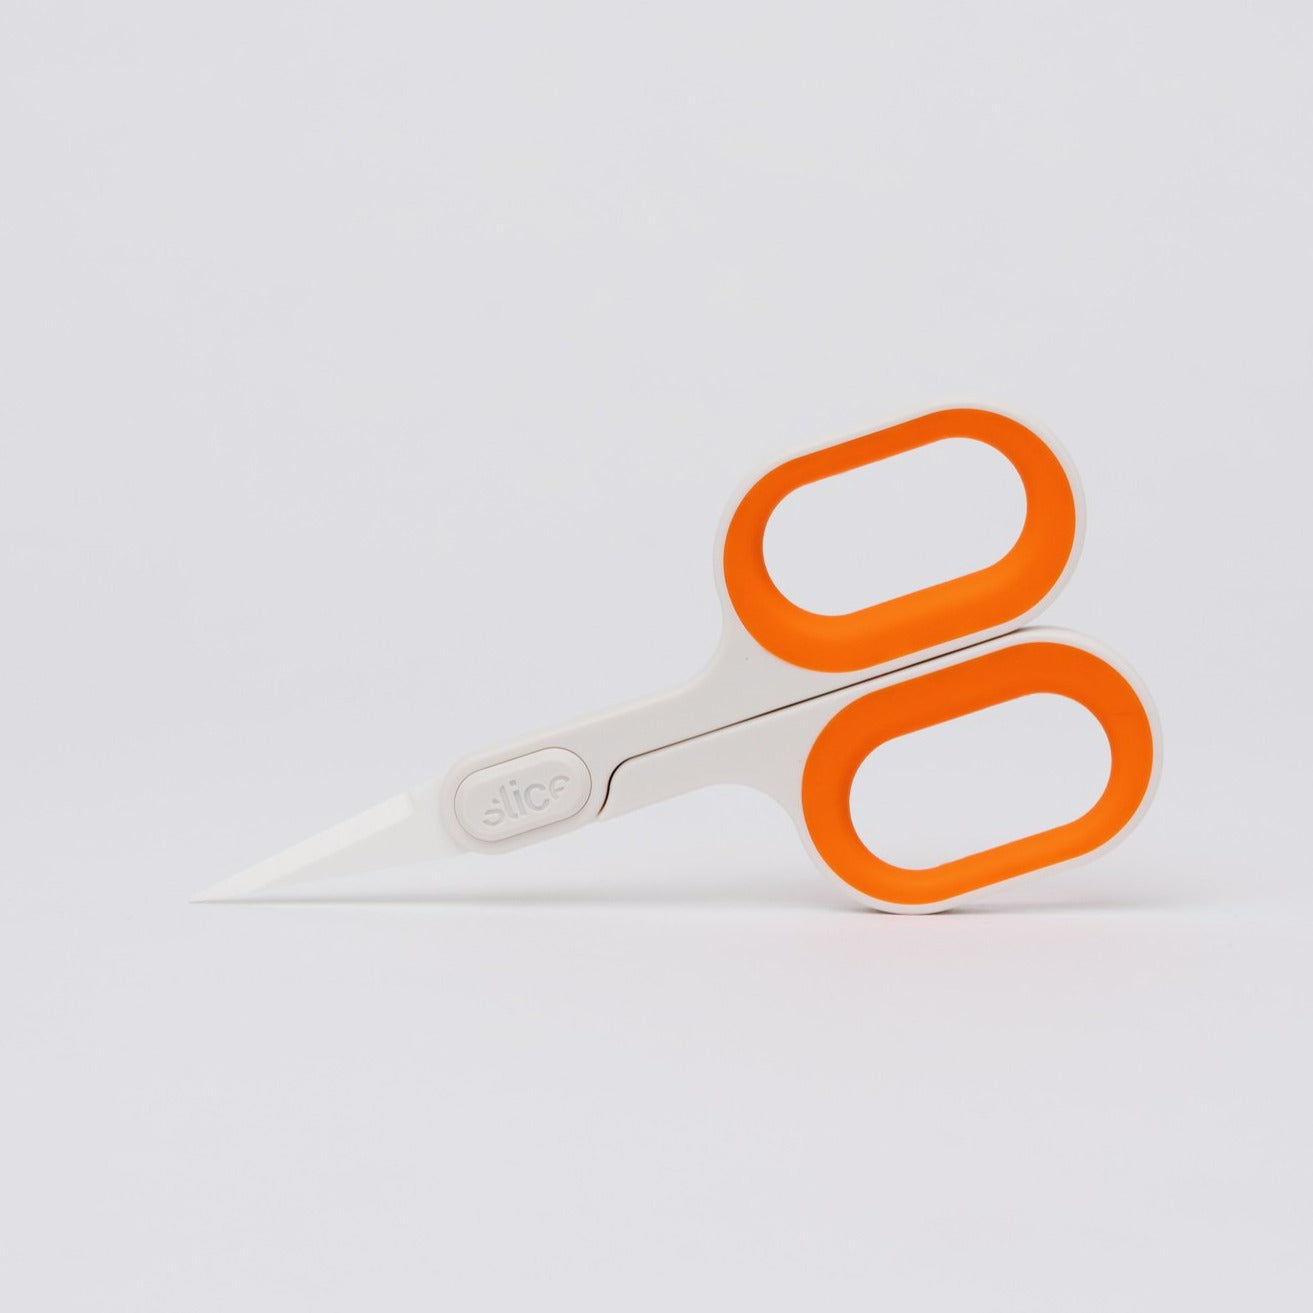 Slice Small Scissors Type: Rounded Tip:Facility Safety and Maintenance